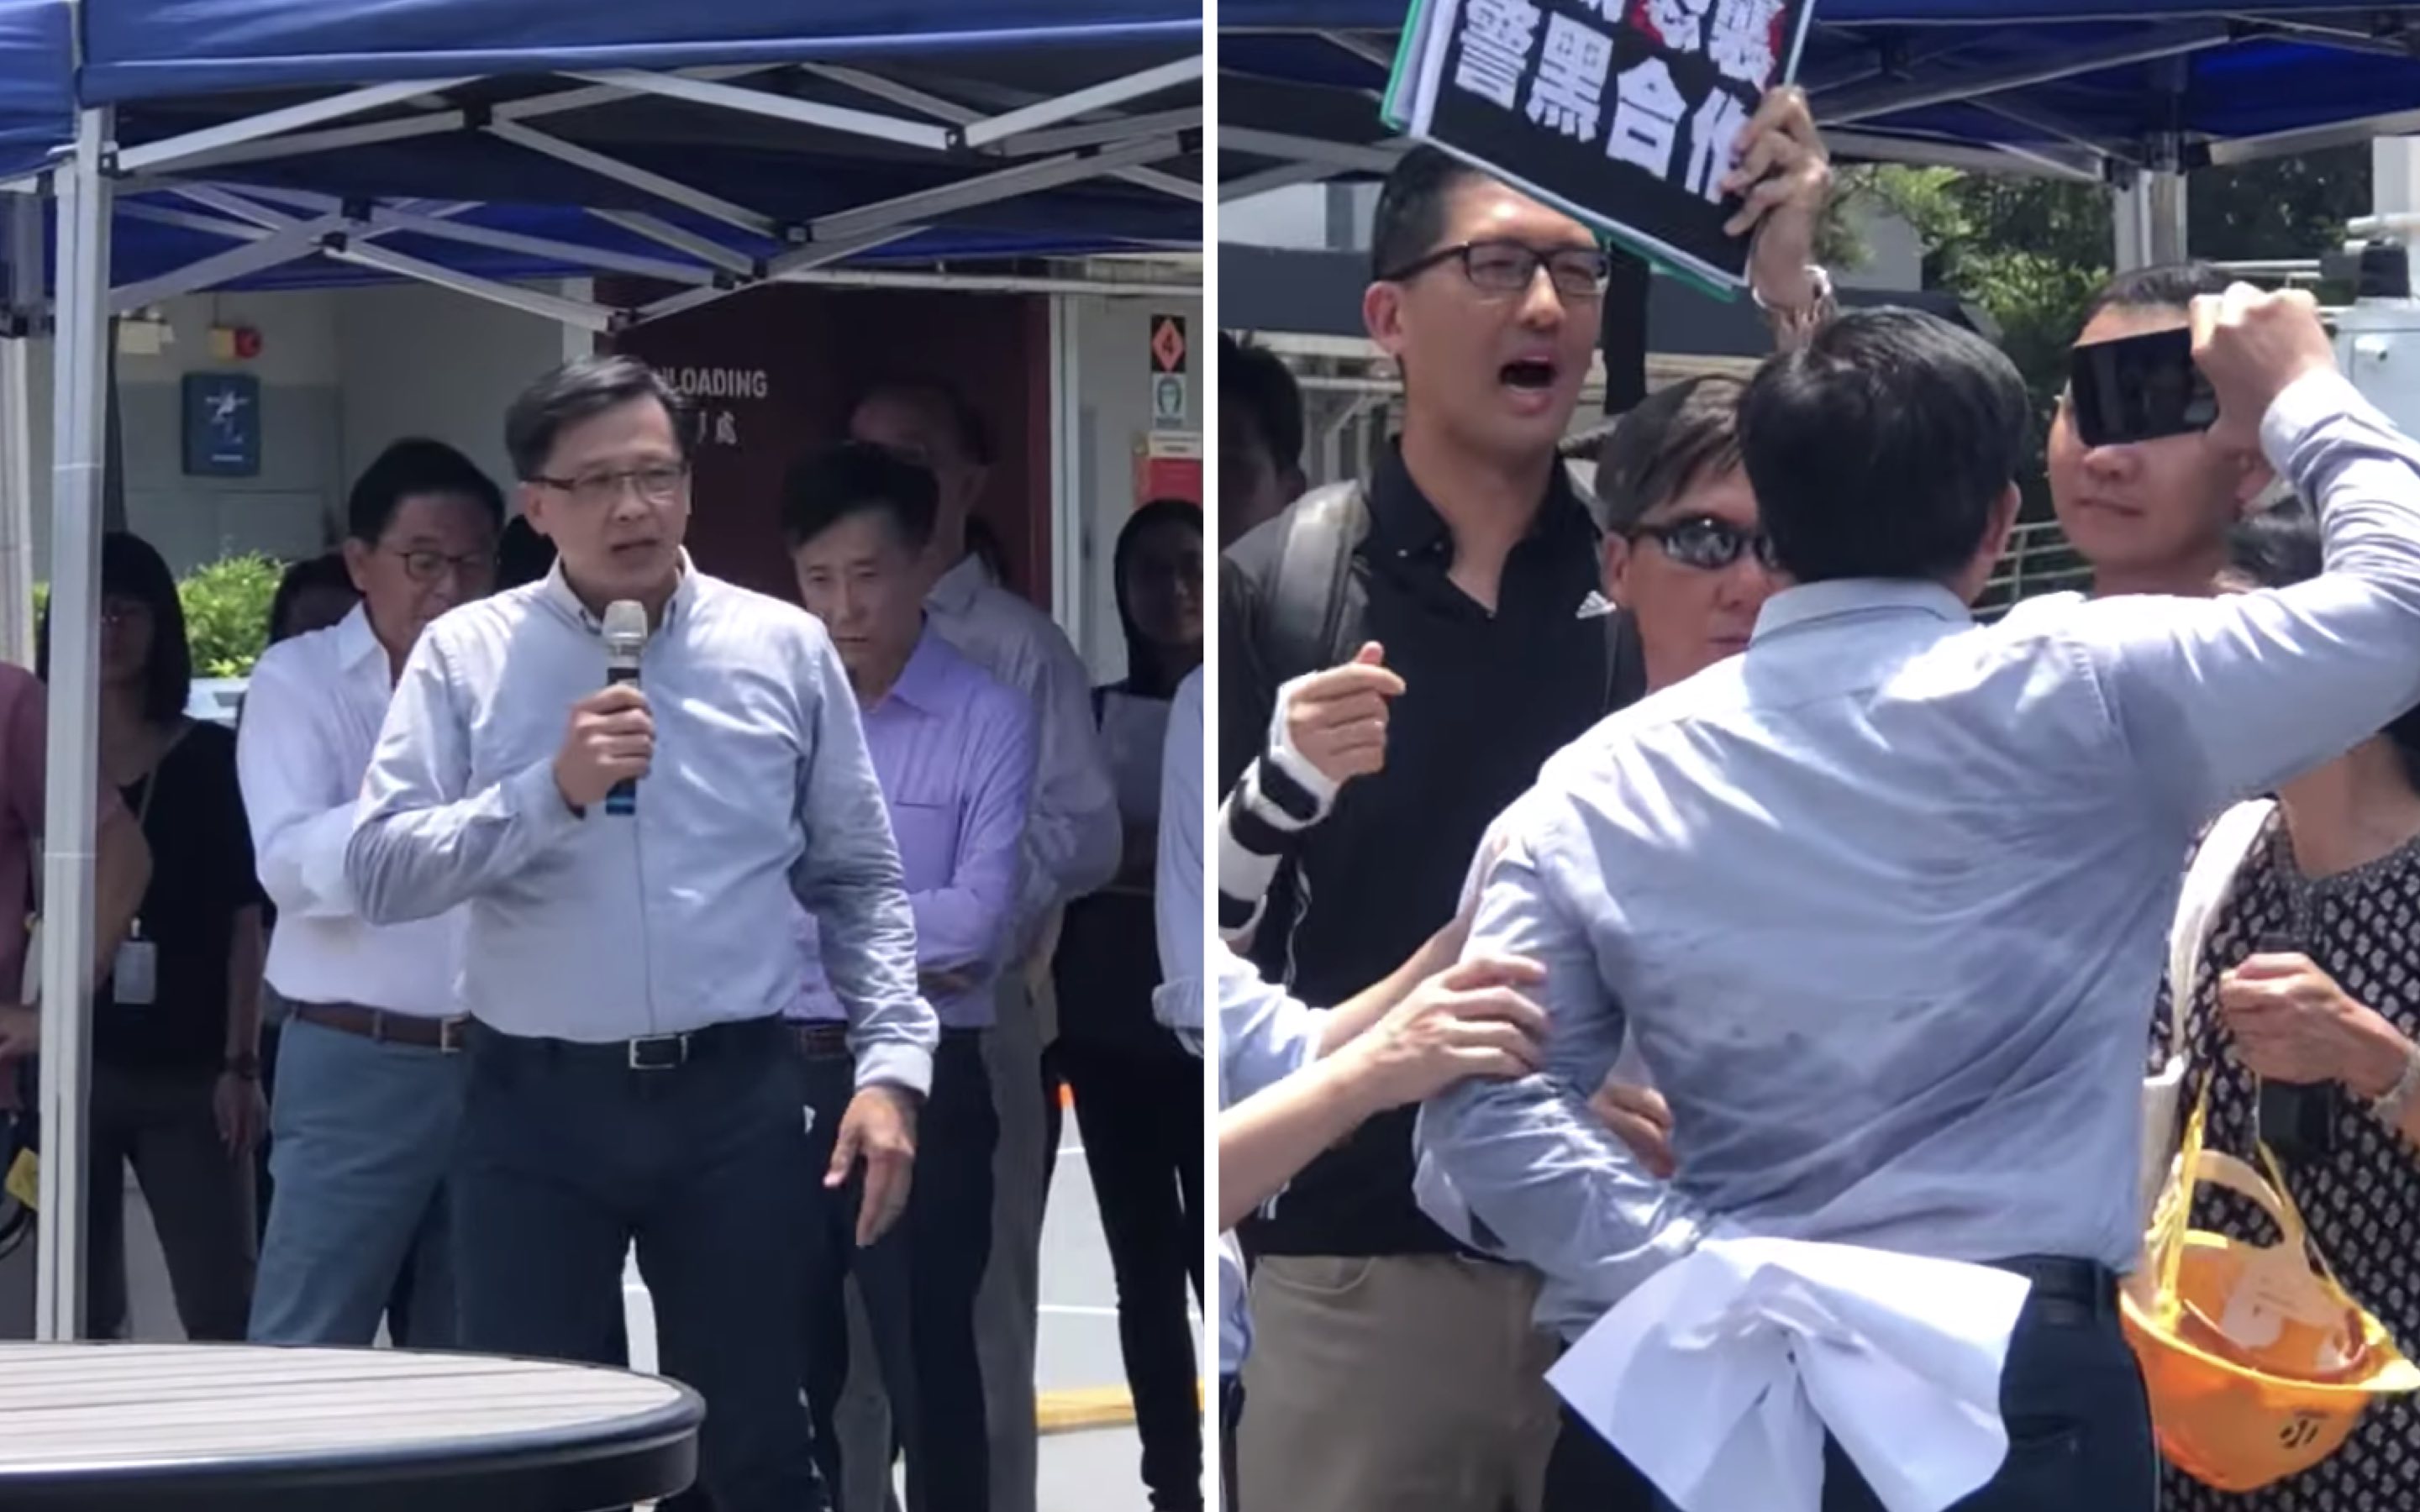 (Left) Pro-Beijing lawmaker Junius Ho at a police demonstration of a water cannon. During the Q&A session he was heckled by pro-democracy lawmakers who yelled ‘Junius Ho, triad’ (right). Screengrabs via YouTube.